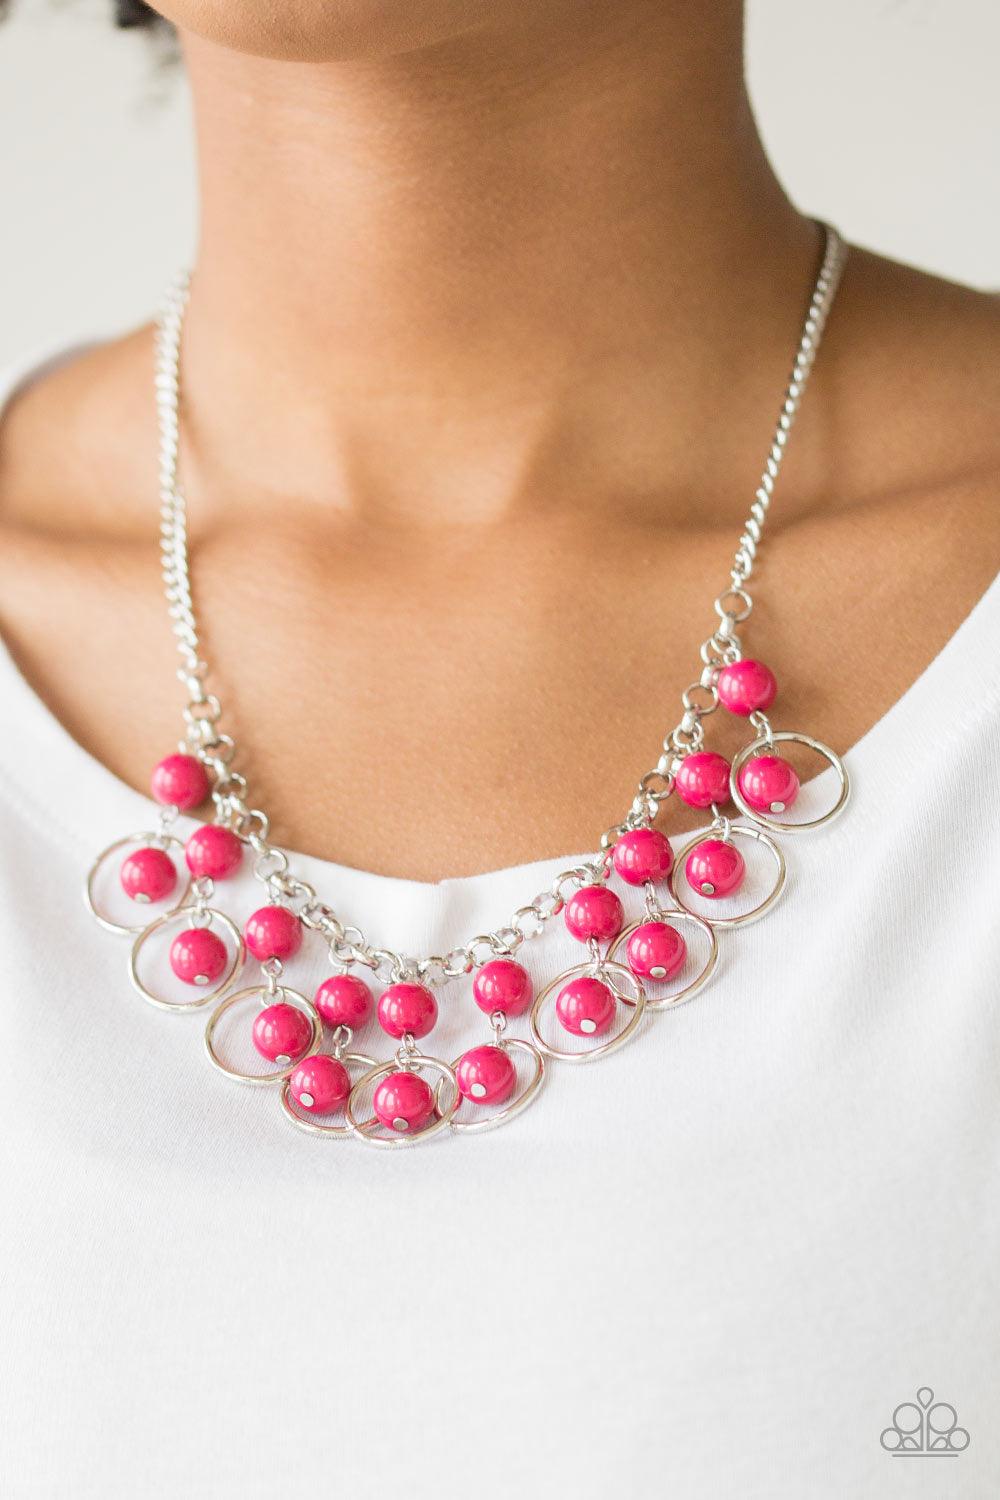 Paparazzi Accessories Really Rococo - Pink Polished pink beads and shimmery silver hoops drip from the bottom of a glistening silver chain, creating a playful fringe below the collar. Features an adjustable clasp closure. Sold as one individual necklace.